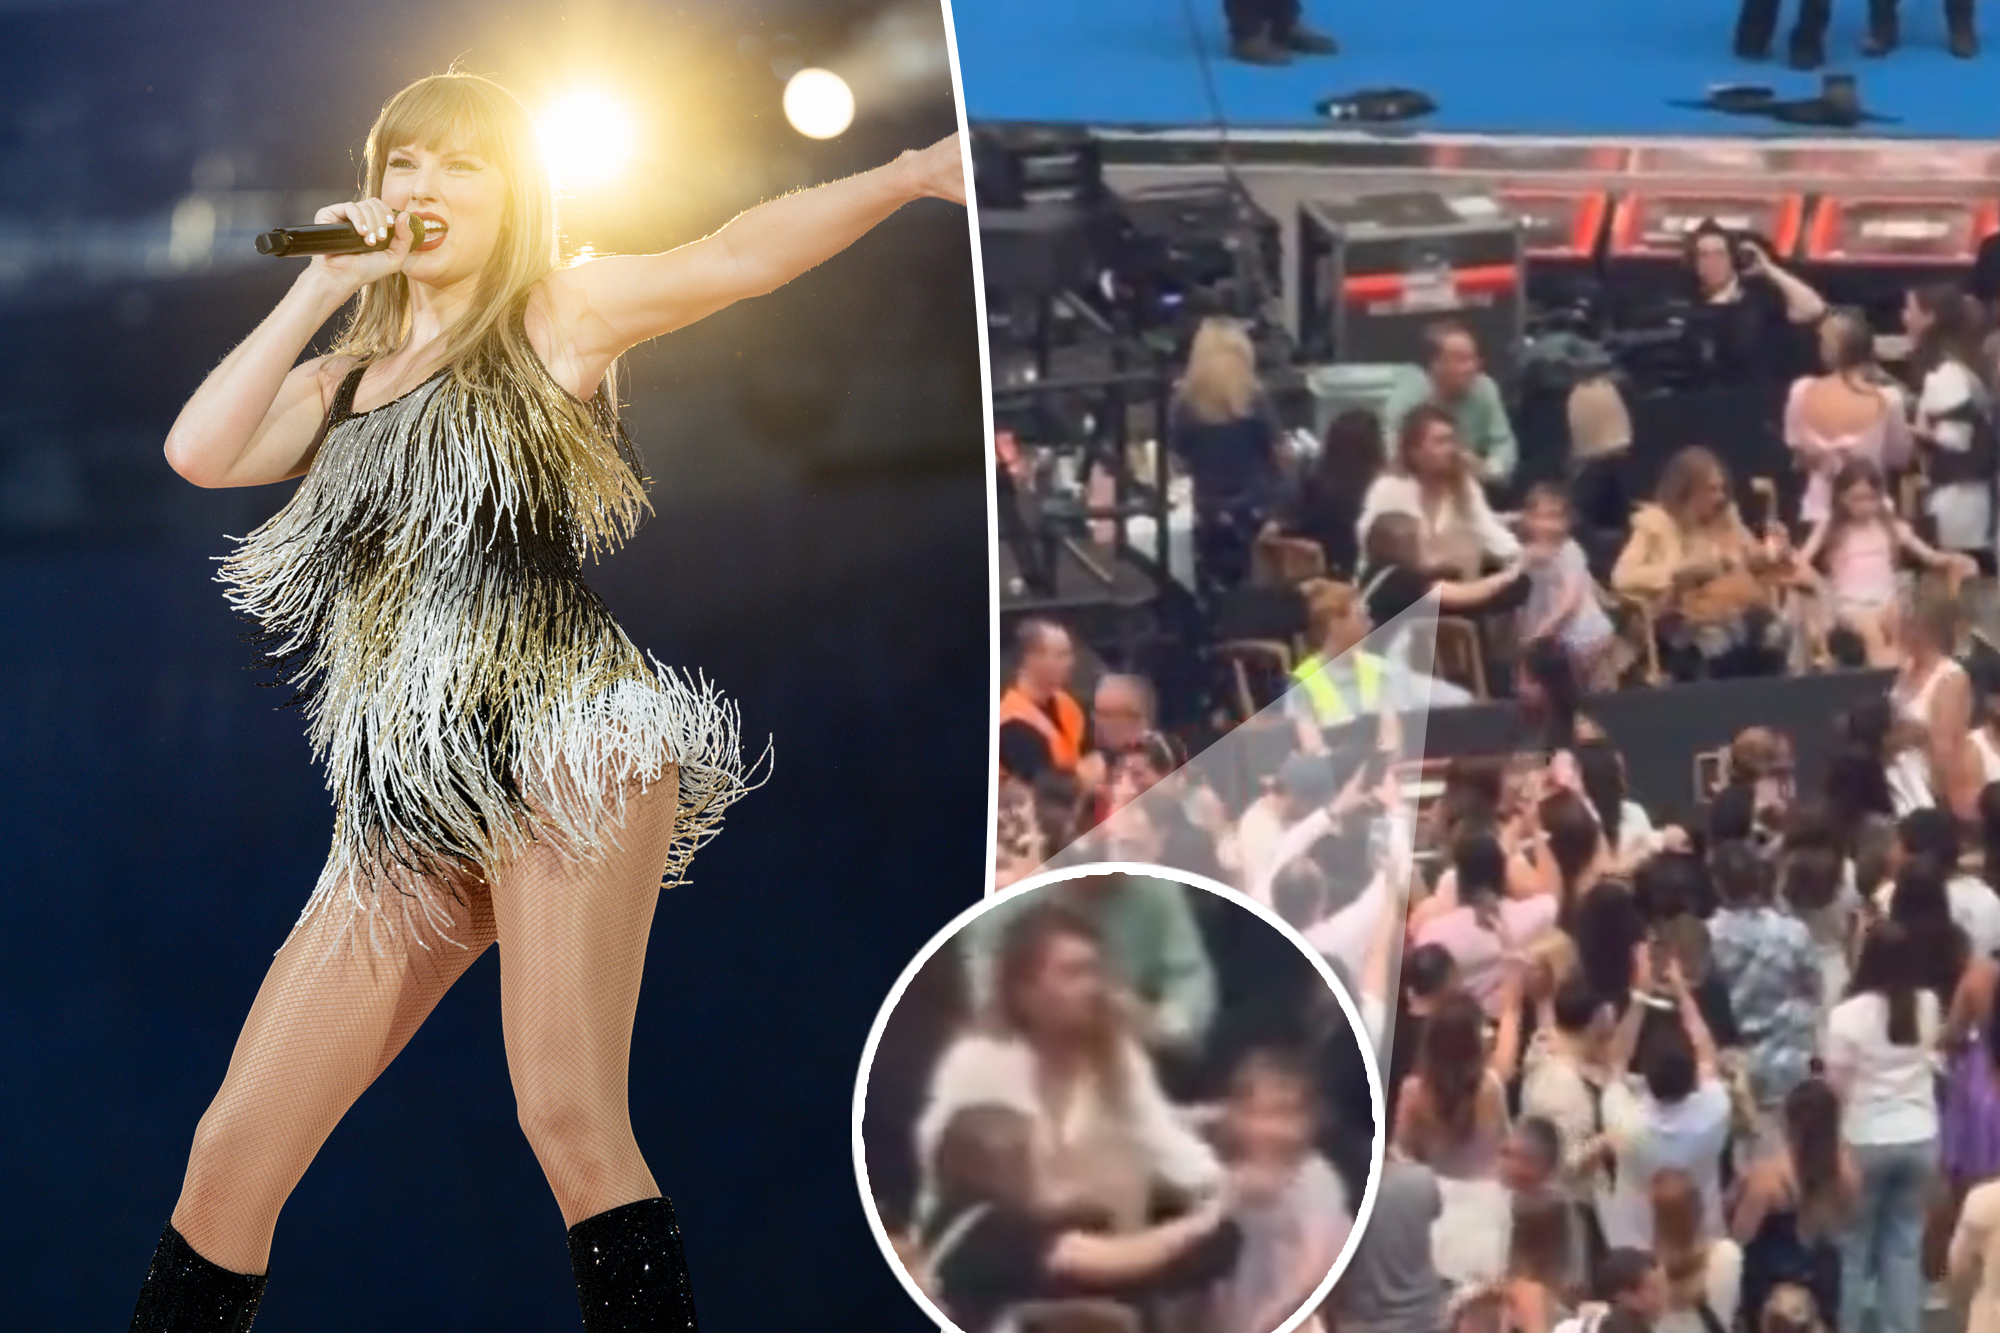 Blake Lively and Ryan Reynolds Support Taylor Swift at Eras Tour Show in Spain